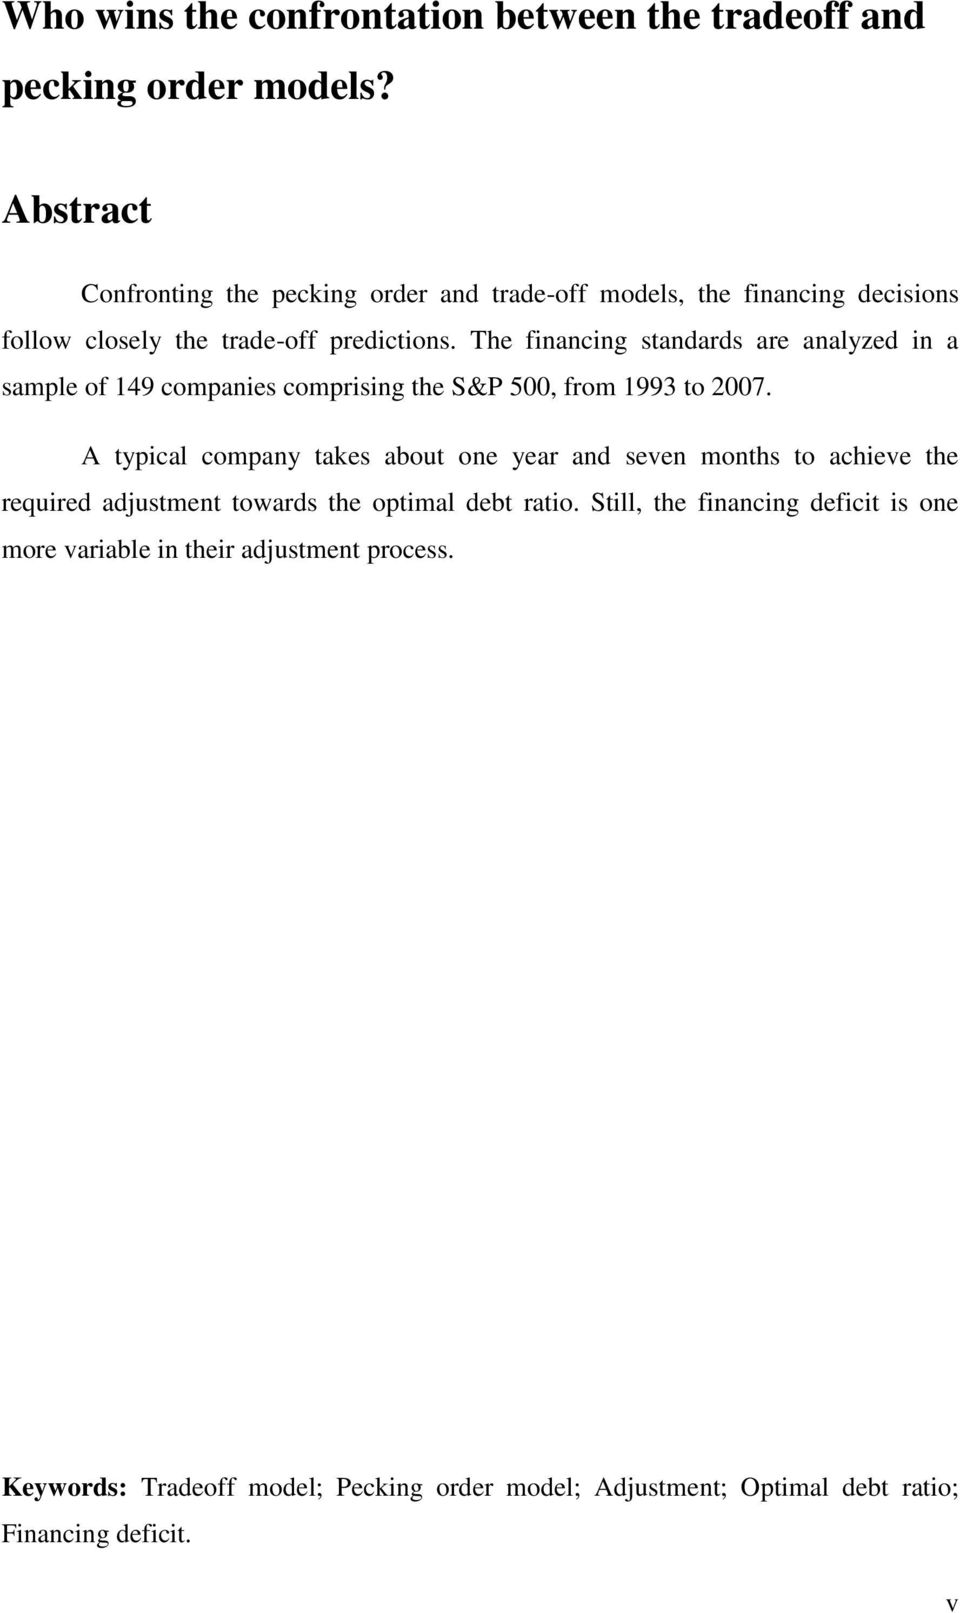 The financing standards are analyzed in a sample of 149 companies comprising the S&P 500, from 1993 to 2007.